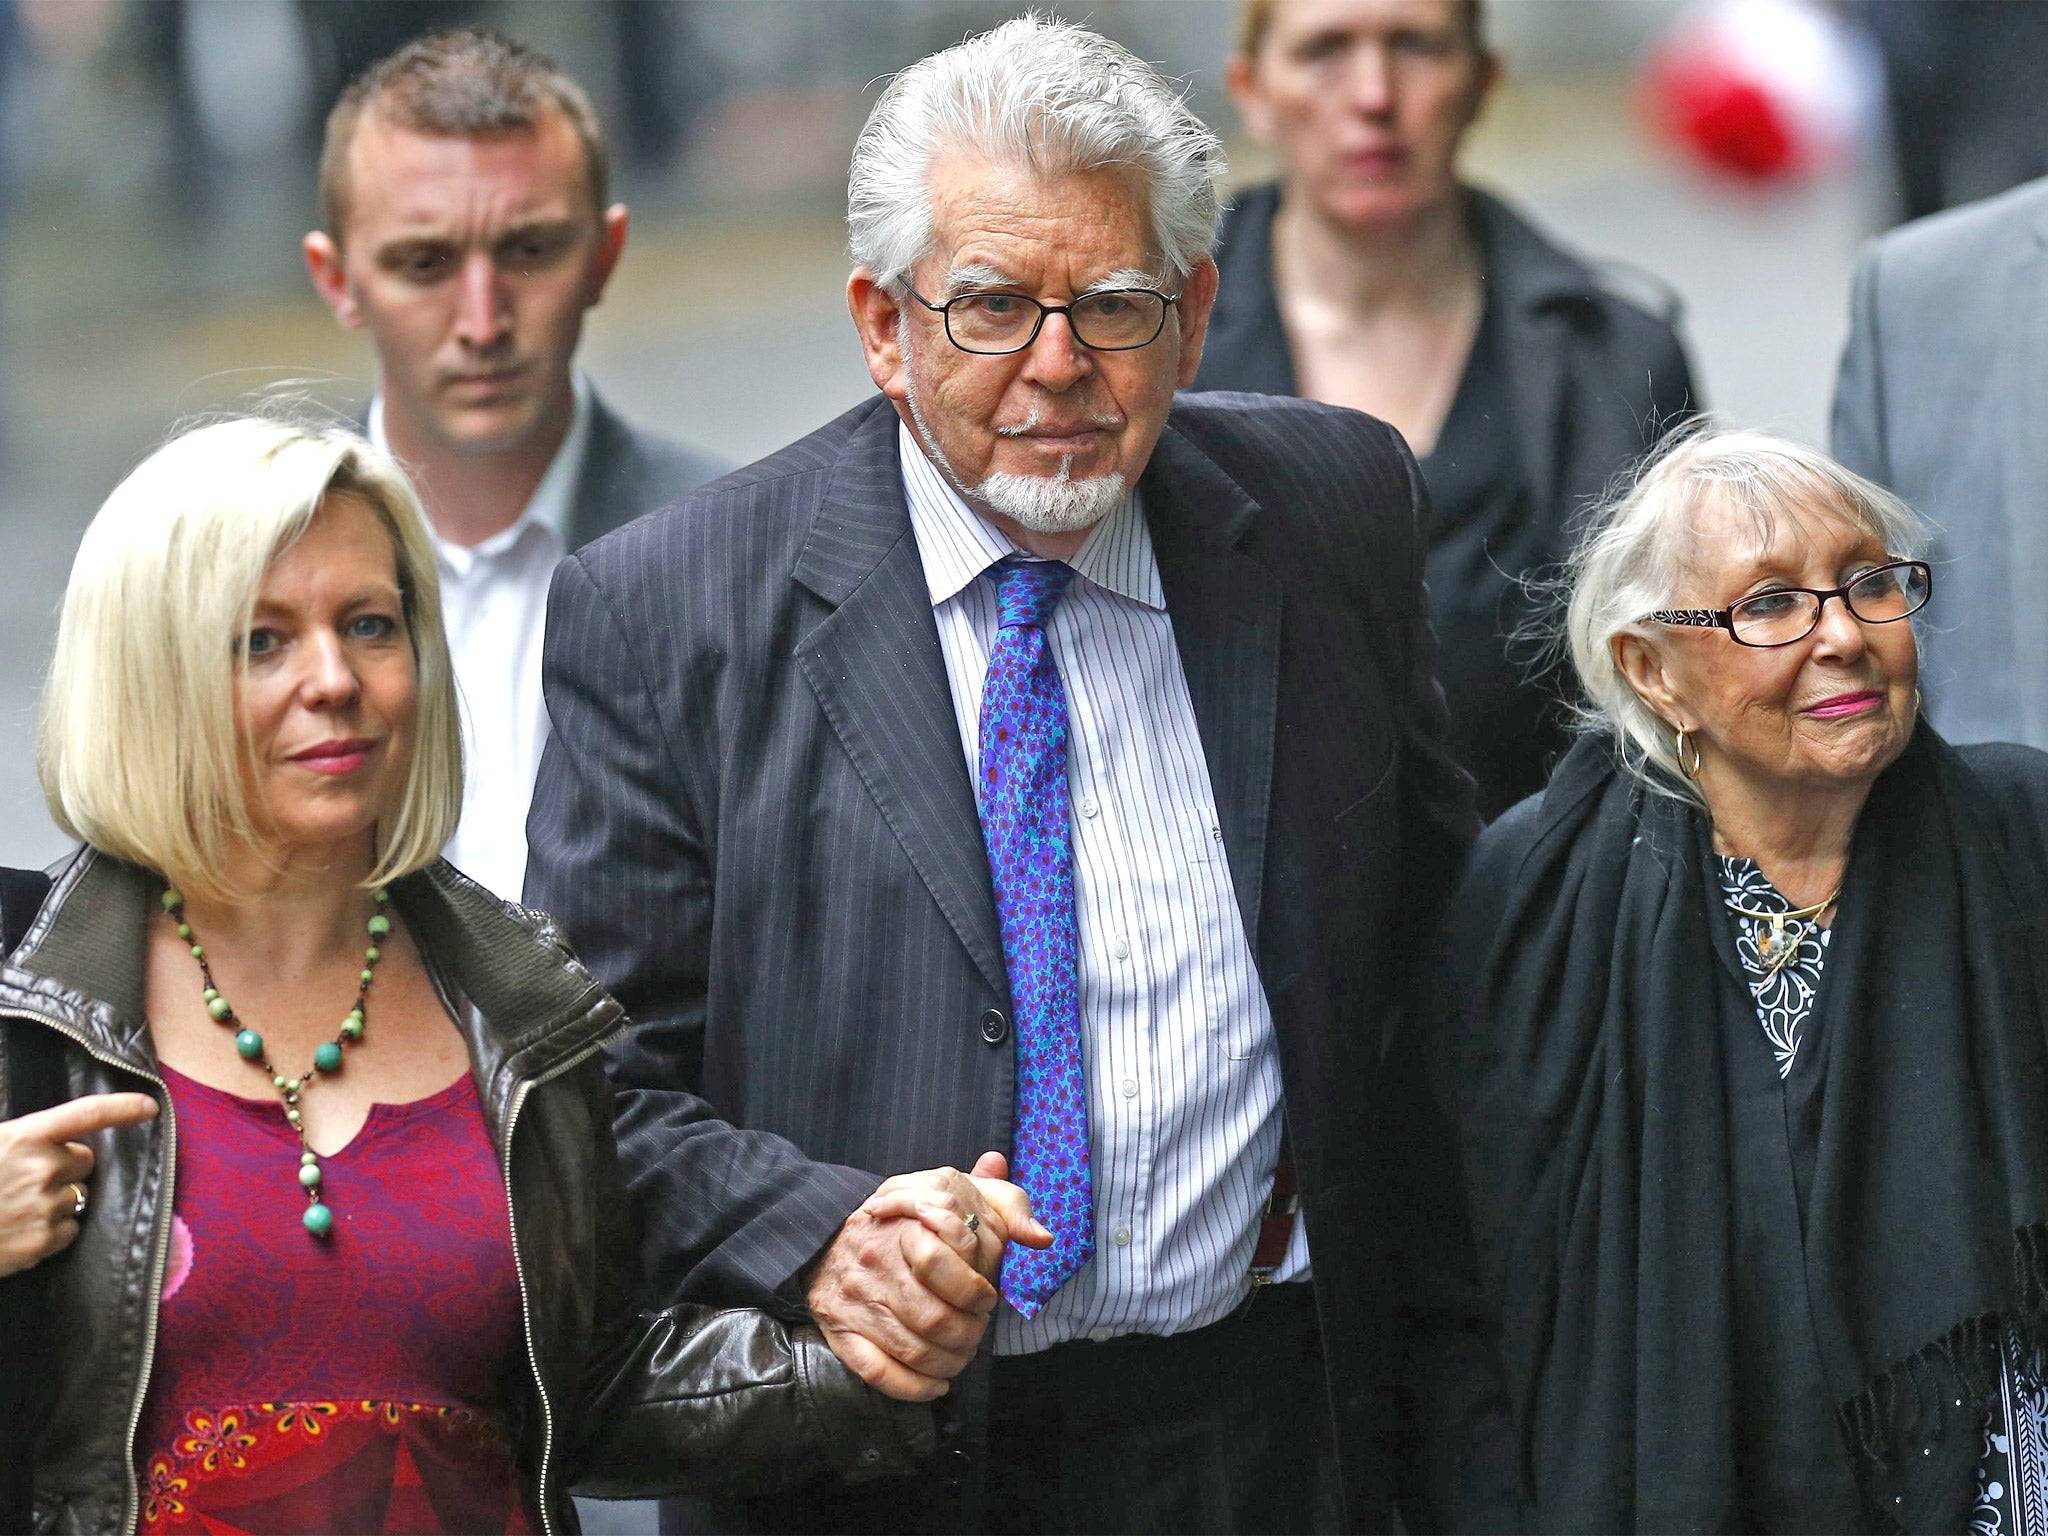 Rolf Harris arrives with his wife Alwen Hughes (right) and his daughter Bindi at Southwark Crown Court